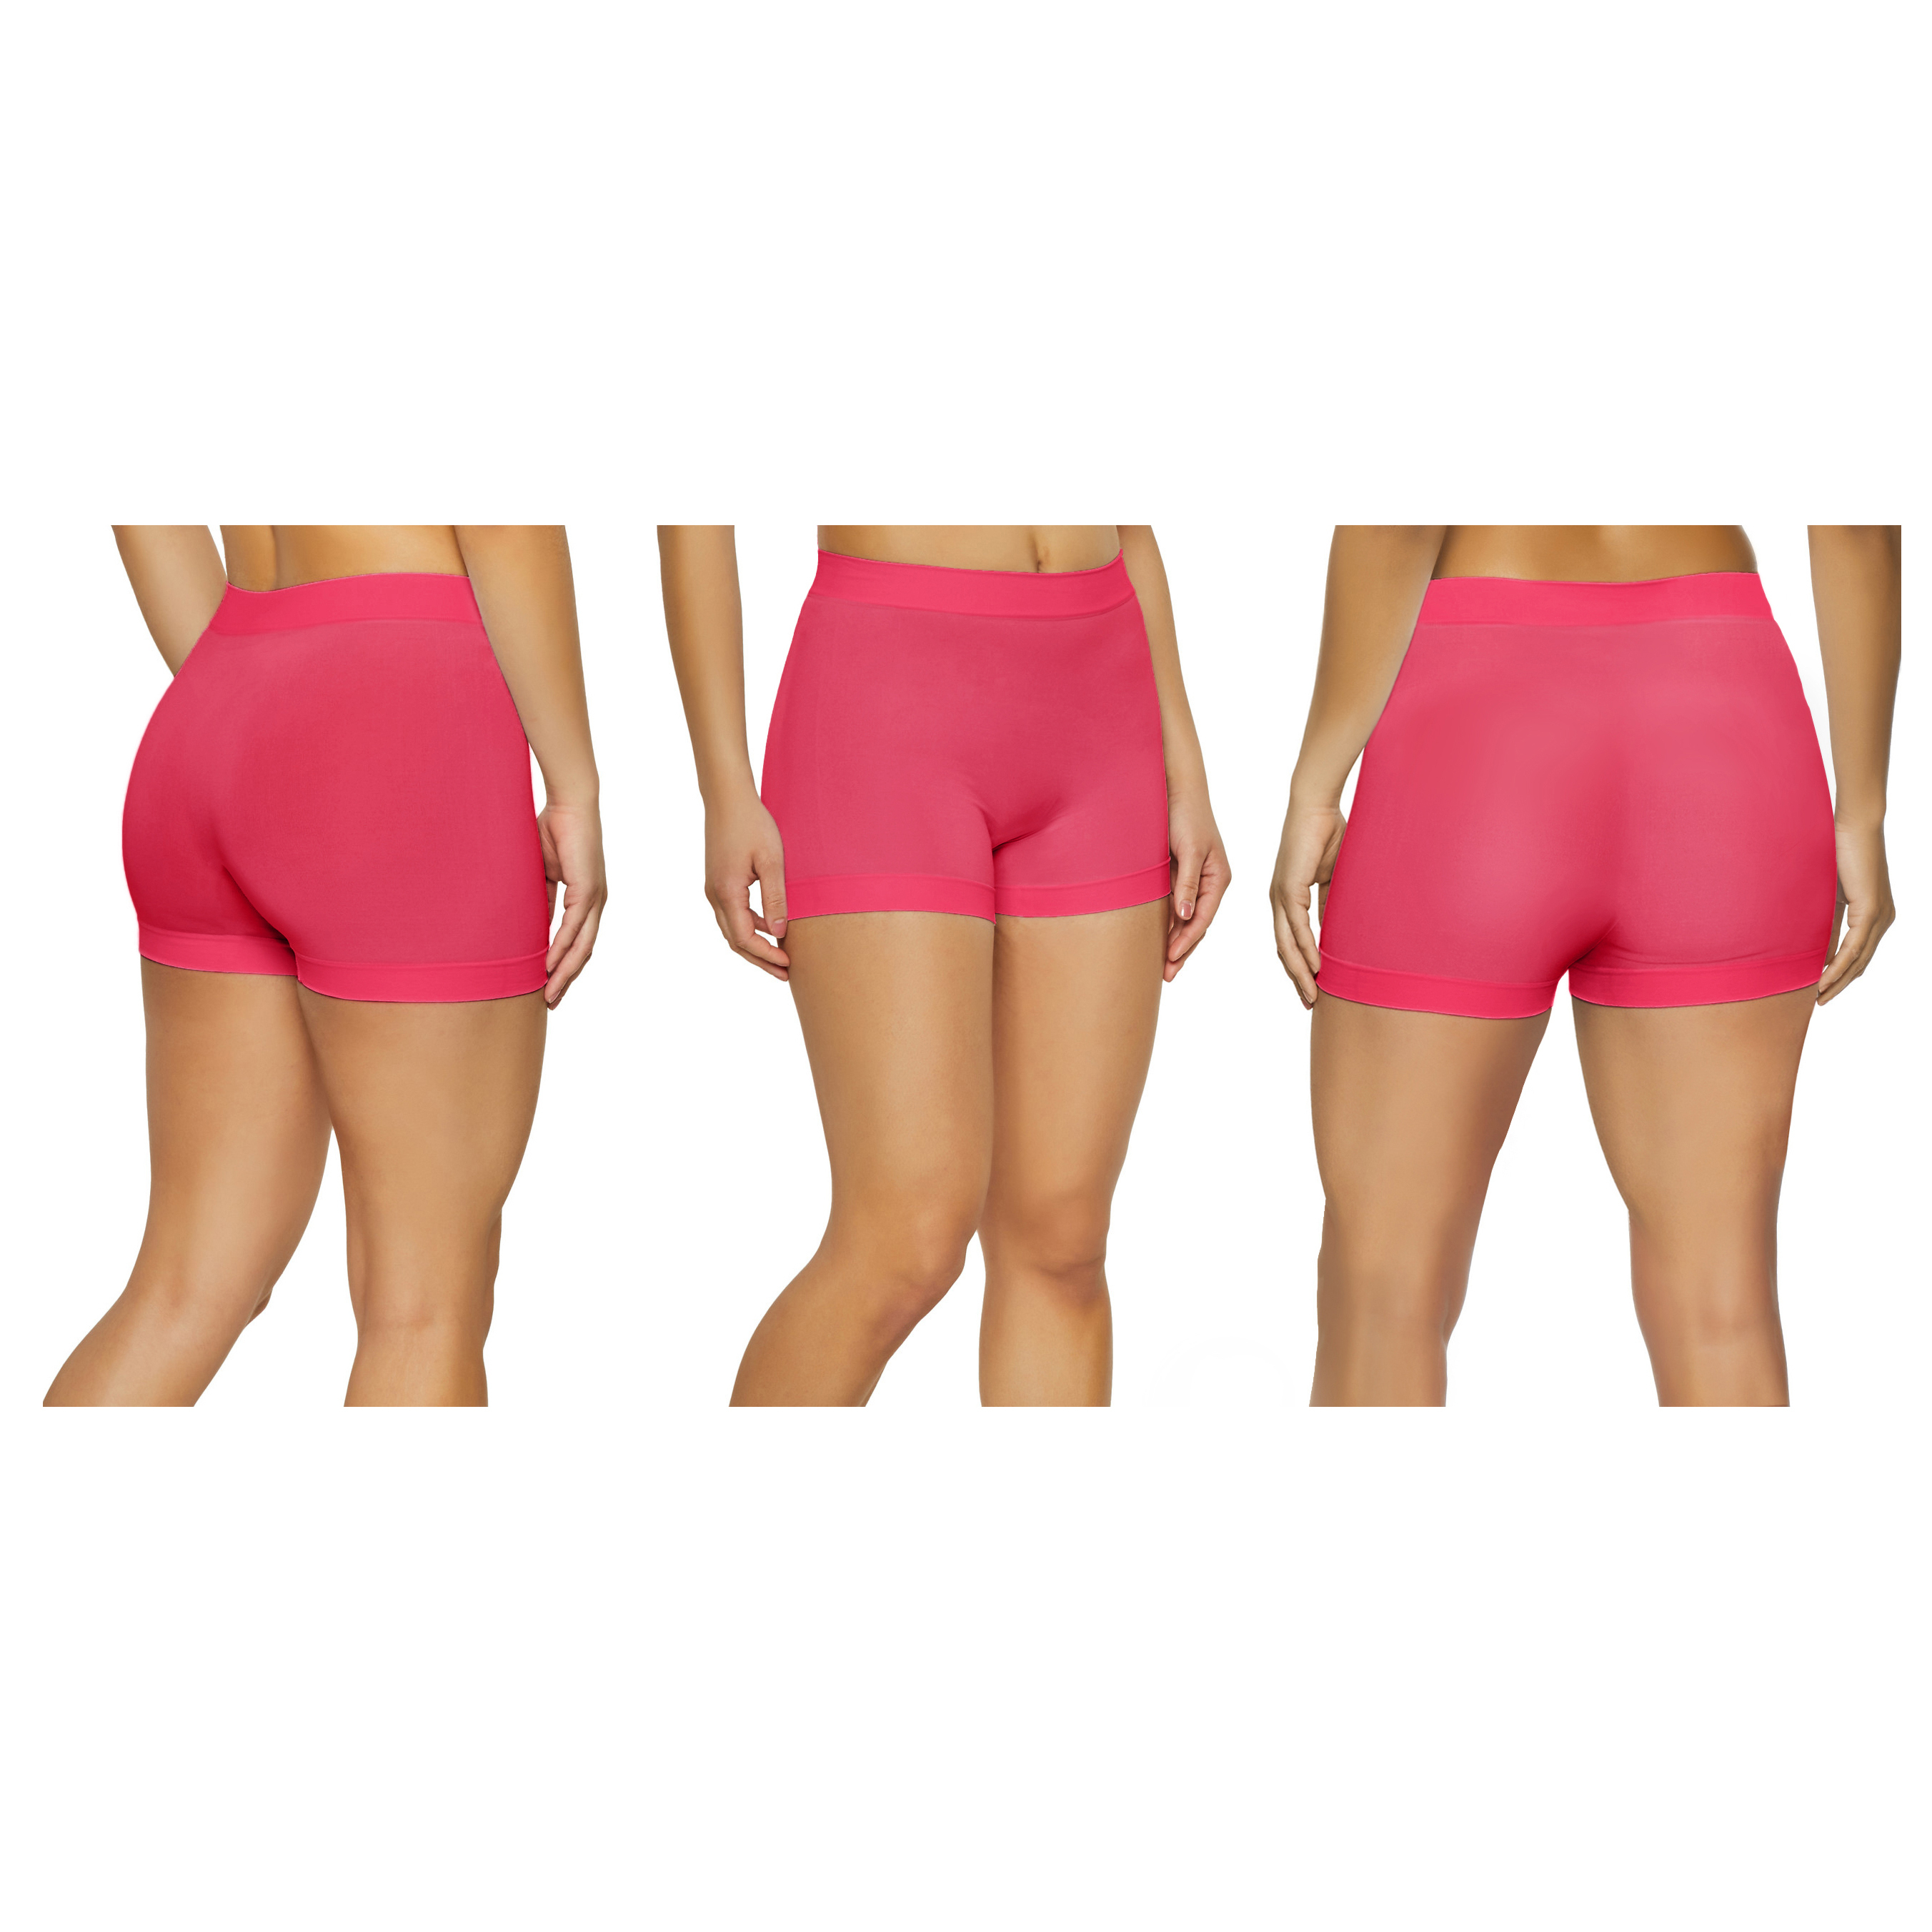 12-Pack Women's High Waisted Biker Bottom Shorts For Yoga Gym Running Ladies Pants - ASSORTED, XS